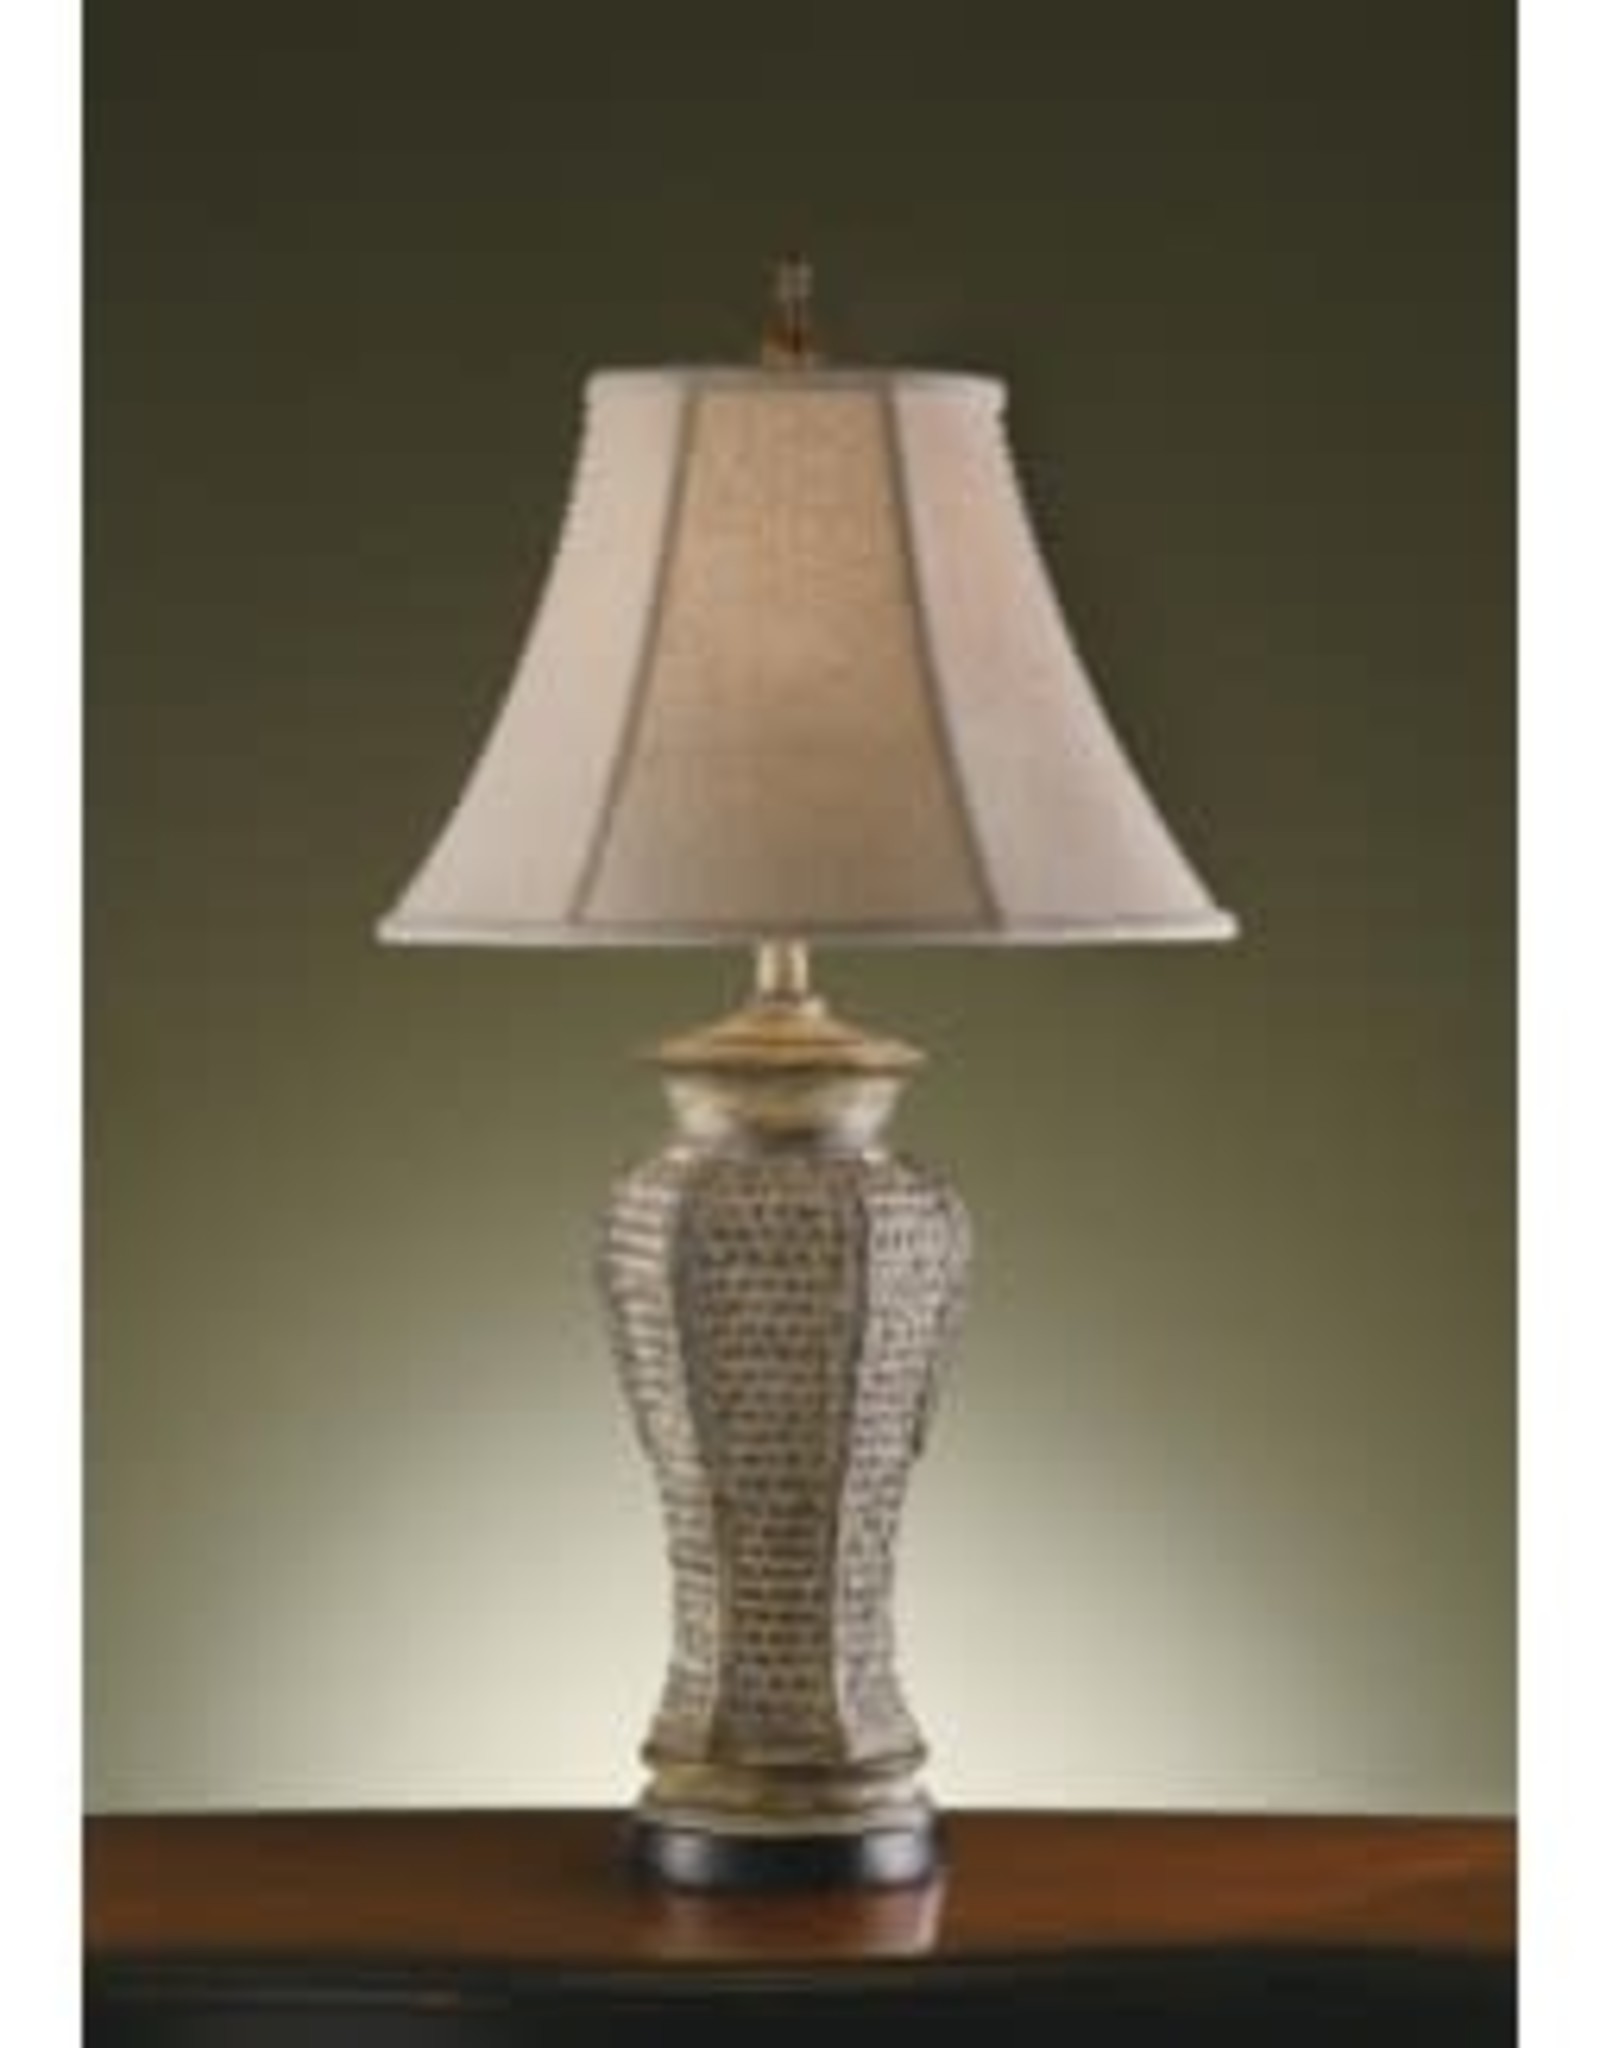 Crestview Cypress Table Lamp